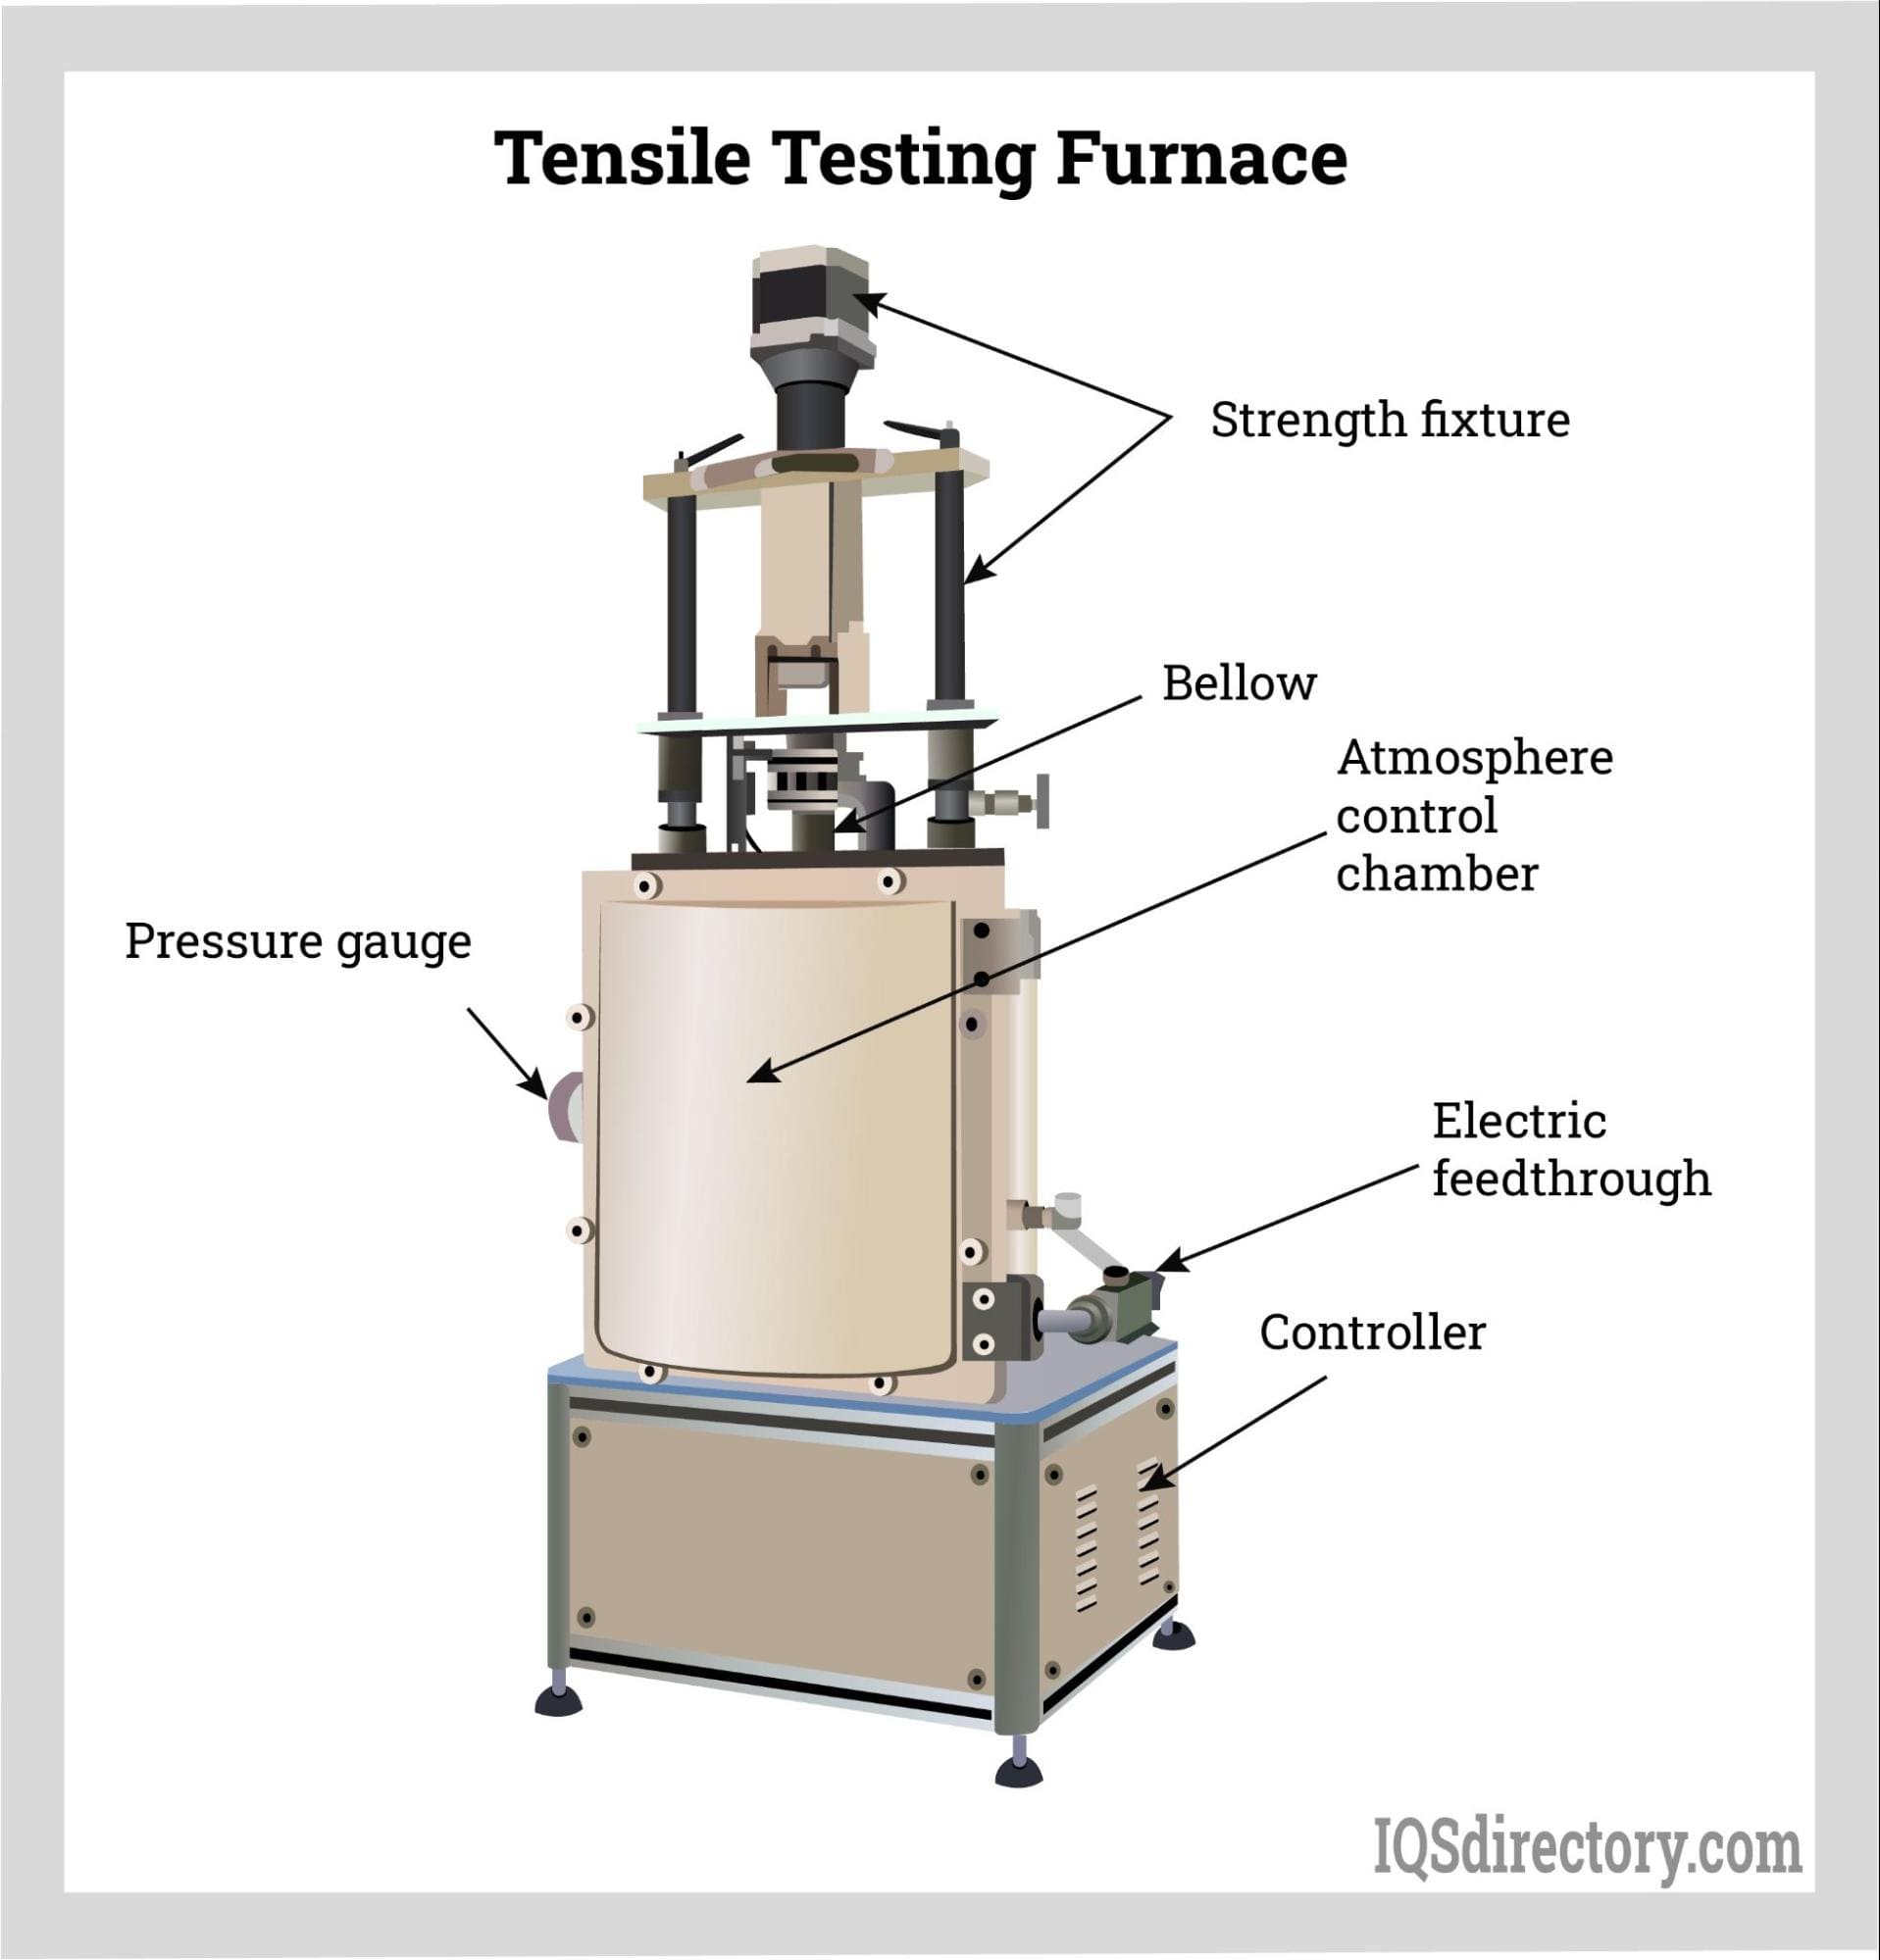 Furnaces: What Is It? How Does It Work? Types, Uses, Fueling